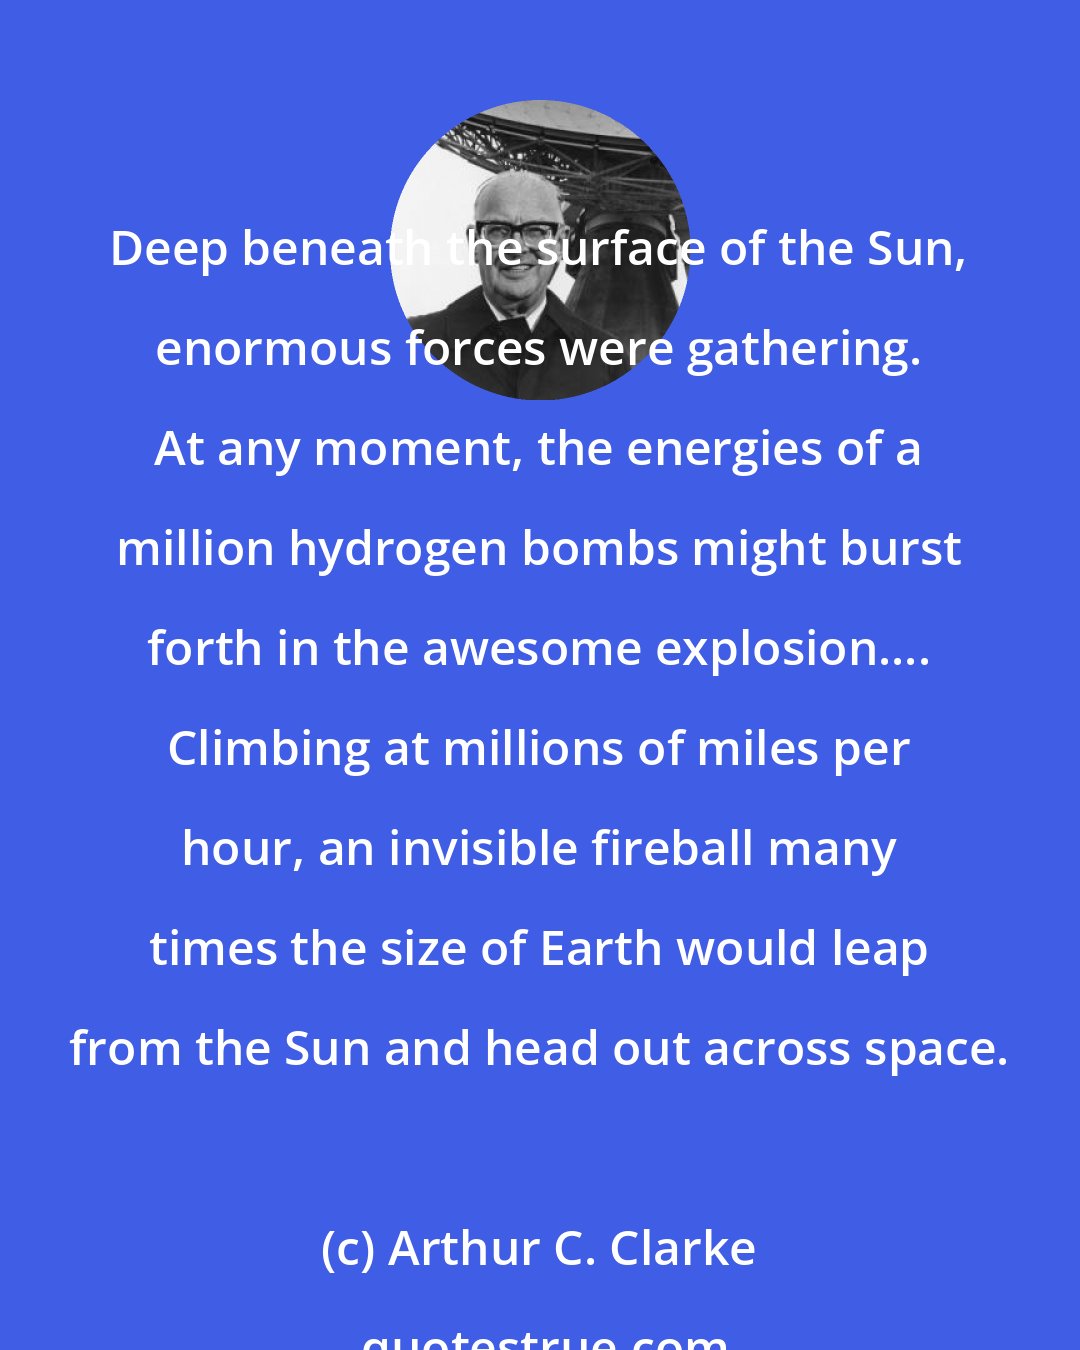 Arthur C. Clarke: Deep beneath the surface of the Sun, enormous forces were gathering. At any moment, the energies of a million hydrogen bombs might burst forth in the awesome explosion.... Climbing at millions of miles per hour, an invisible fireball many times the size of Earth would leap from the Sun and head out across space.